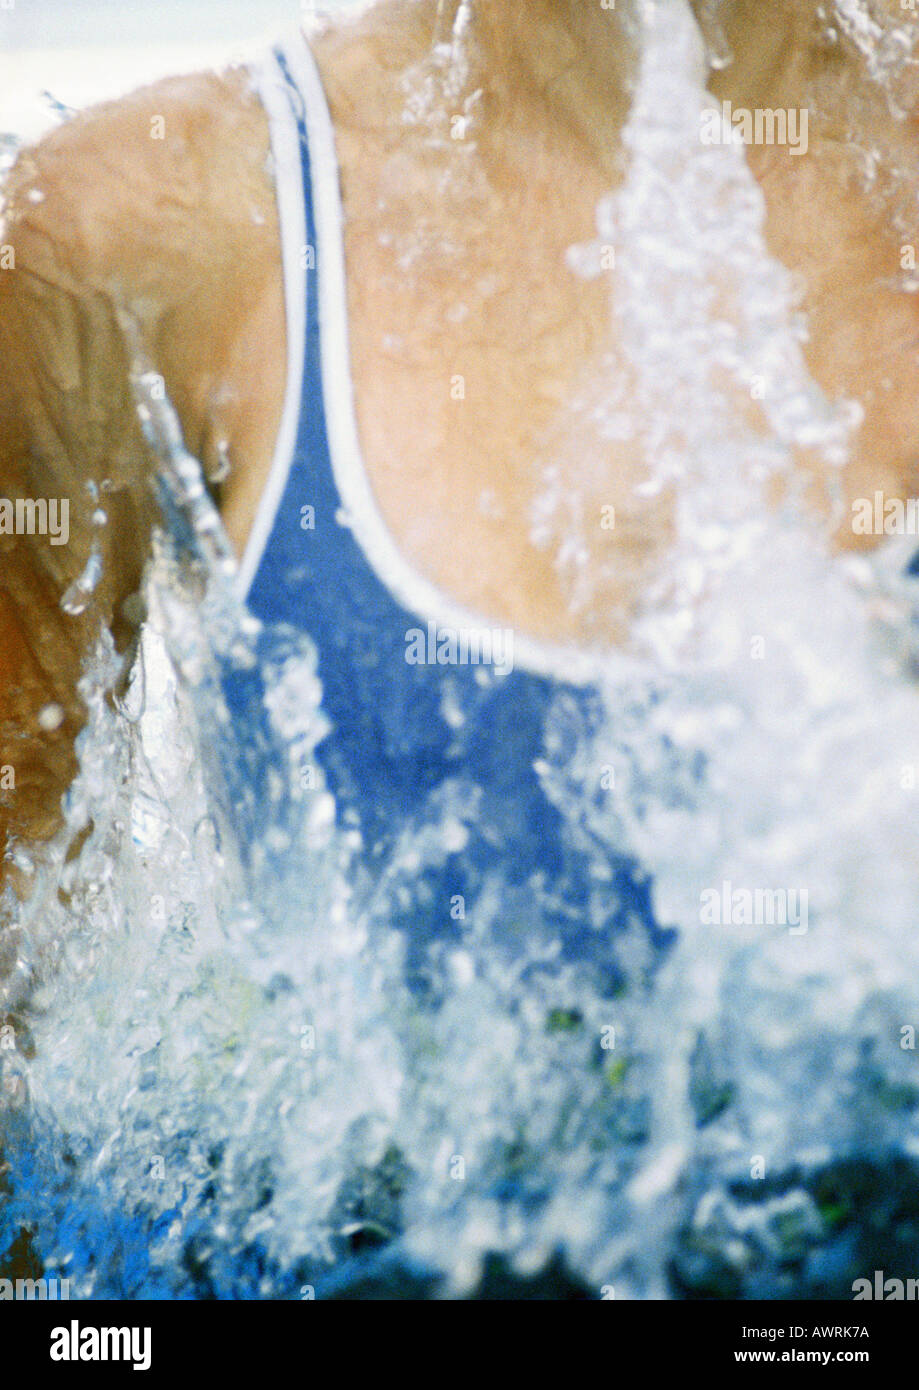 Female swimmer emerging from water, close-up Stock Photo